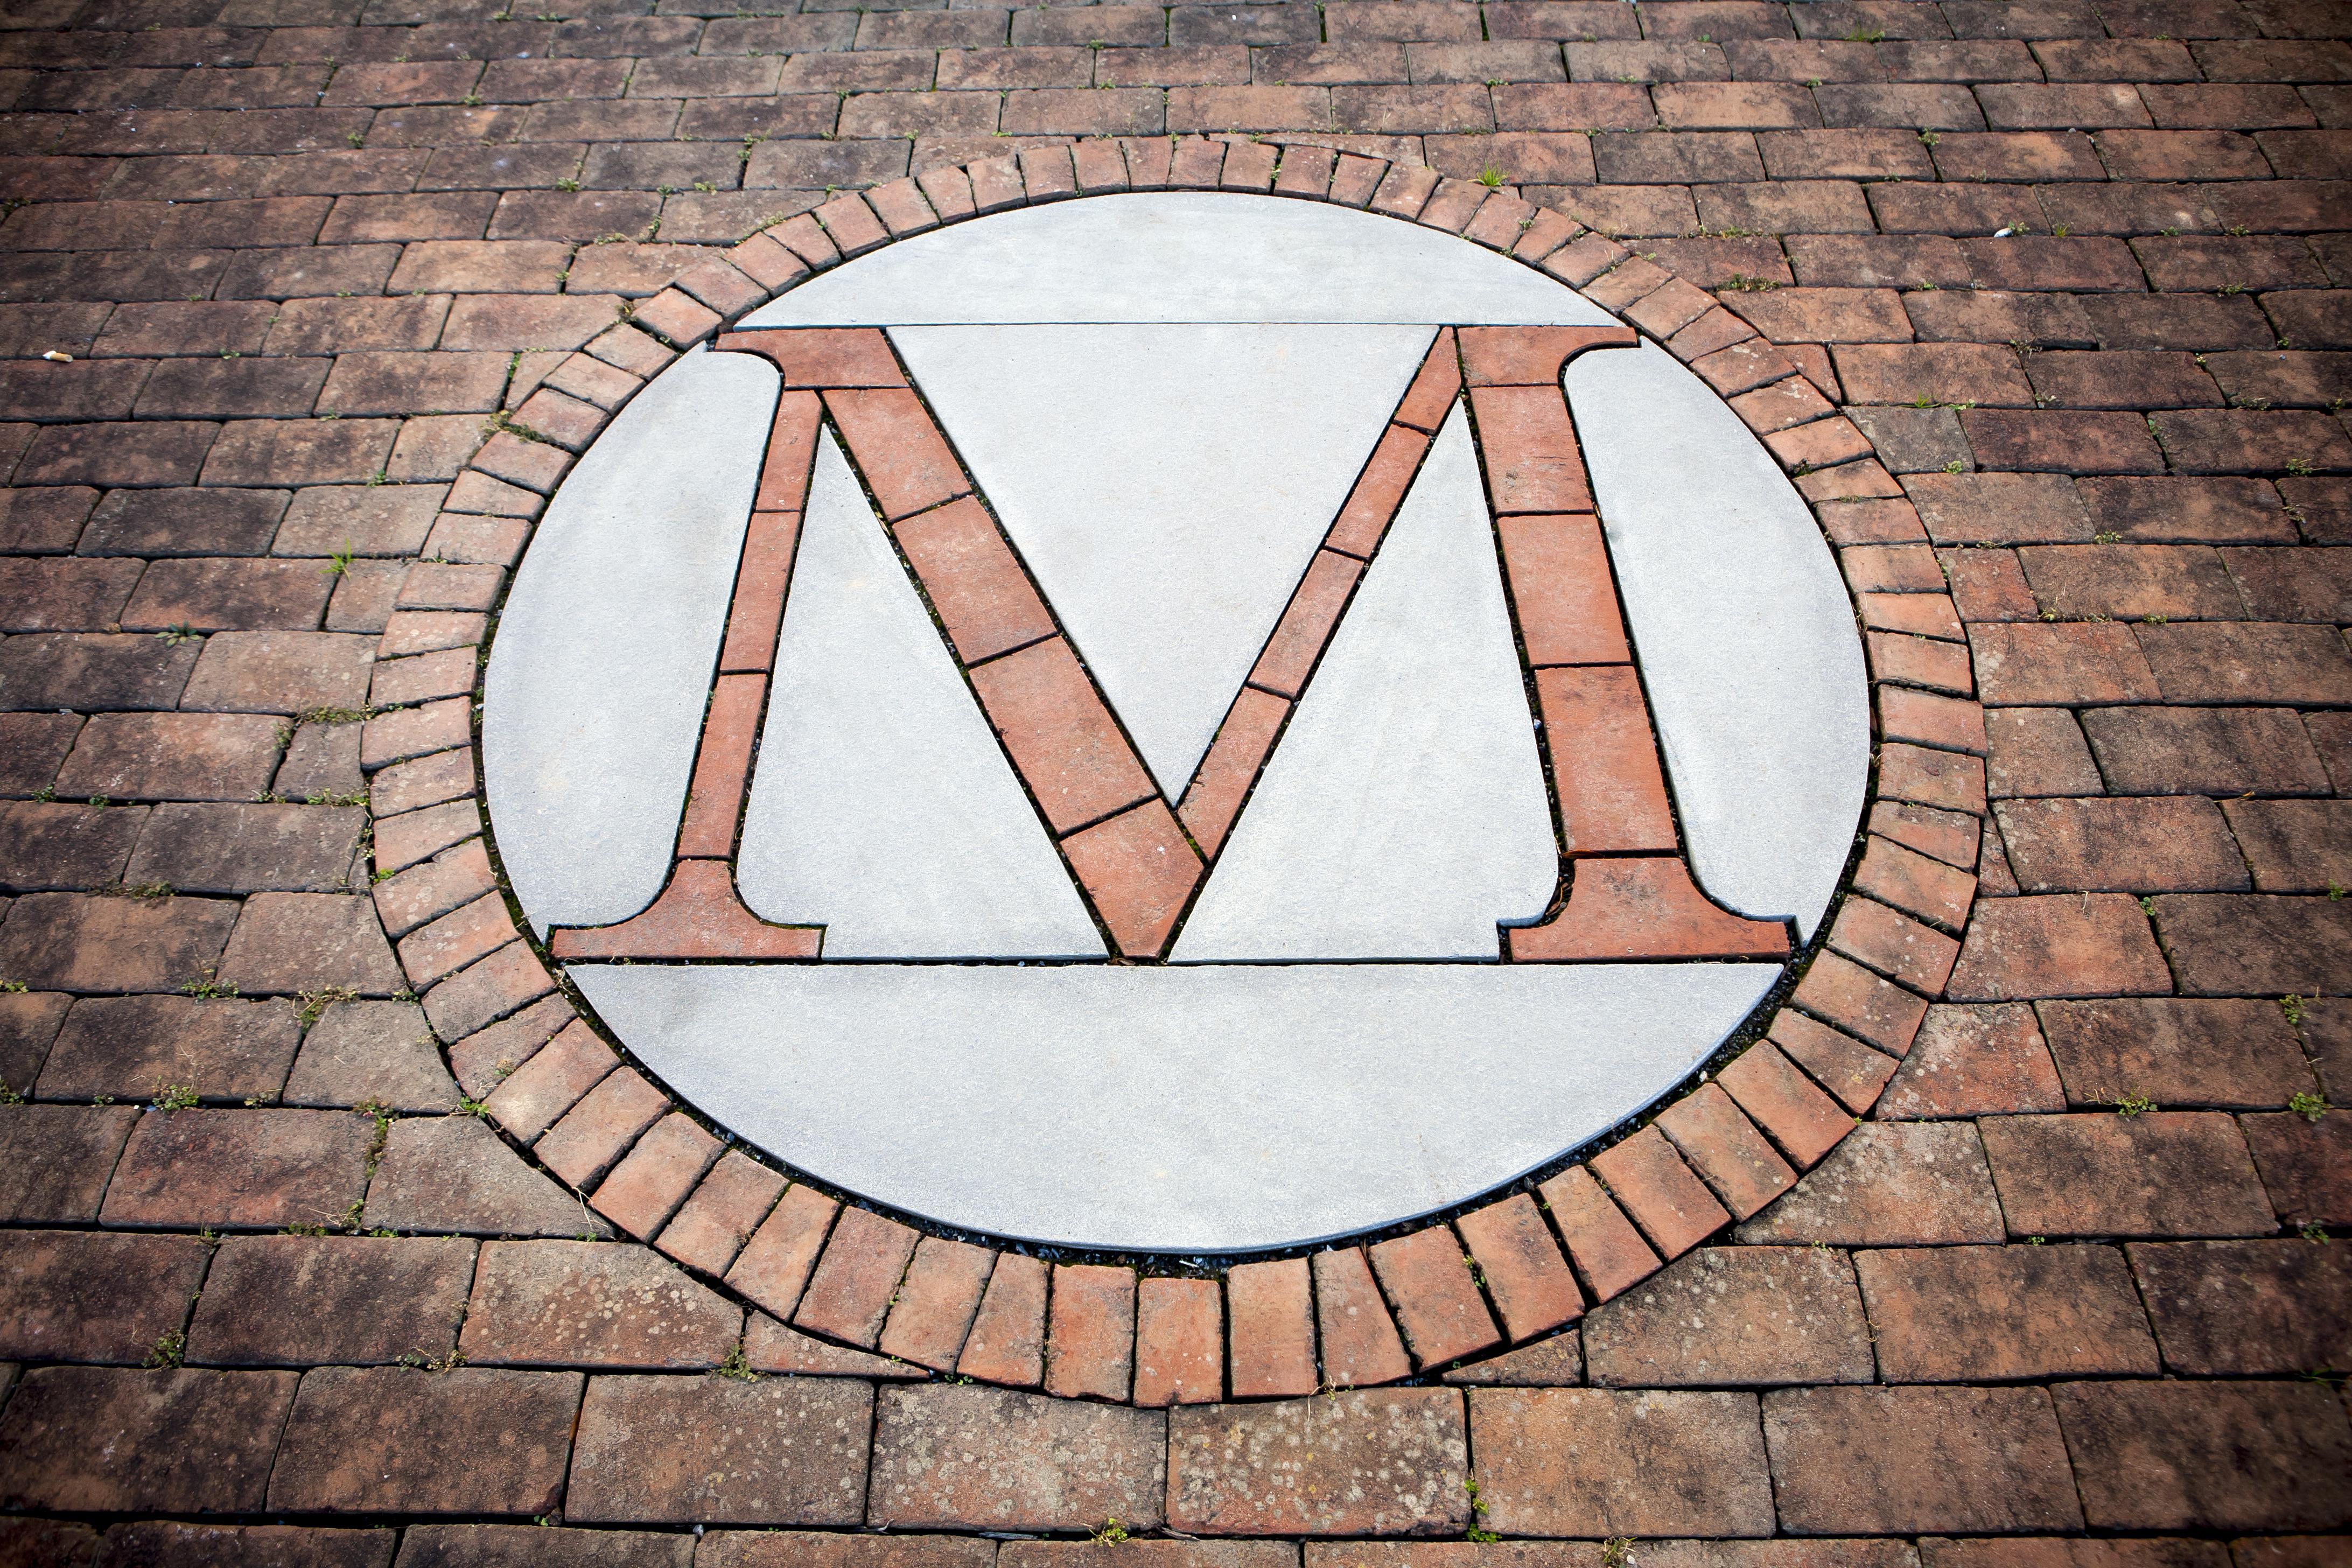 A stylized University 'M' is laid out in bricks on a walkway on campus at UMD